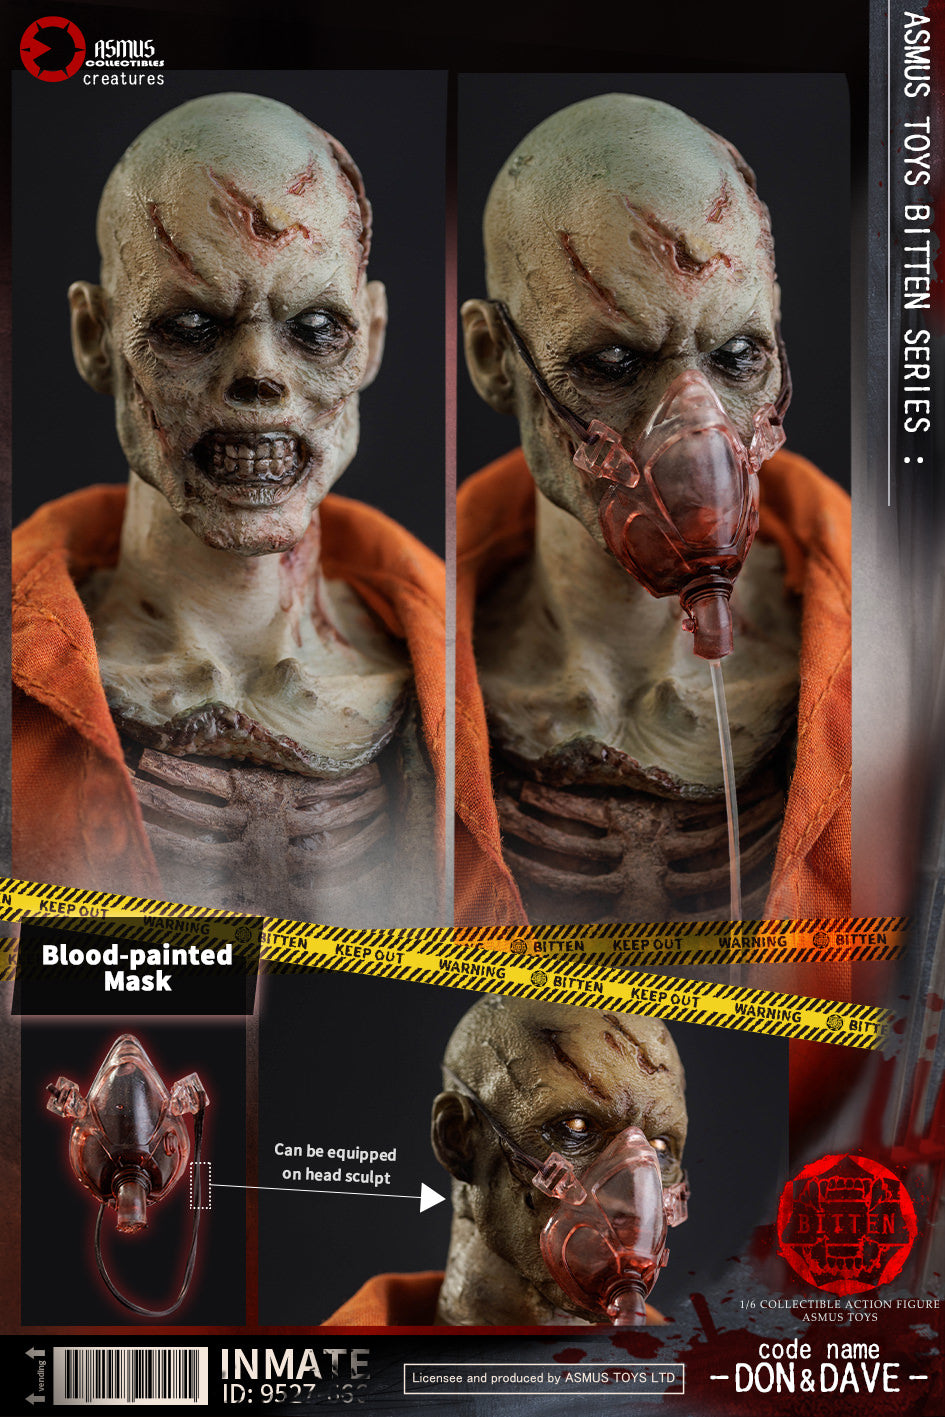 Bitten: Dave Sixth Scale Figure by Asmus